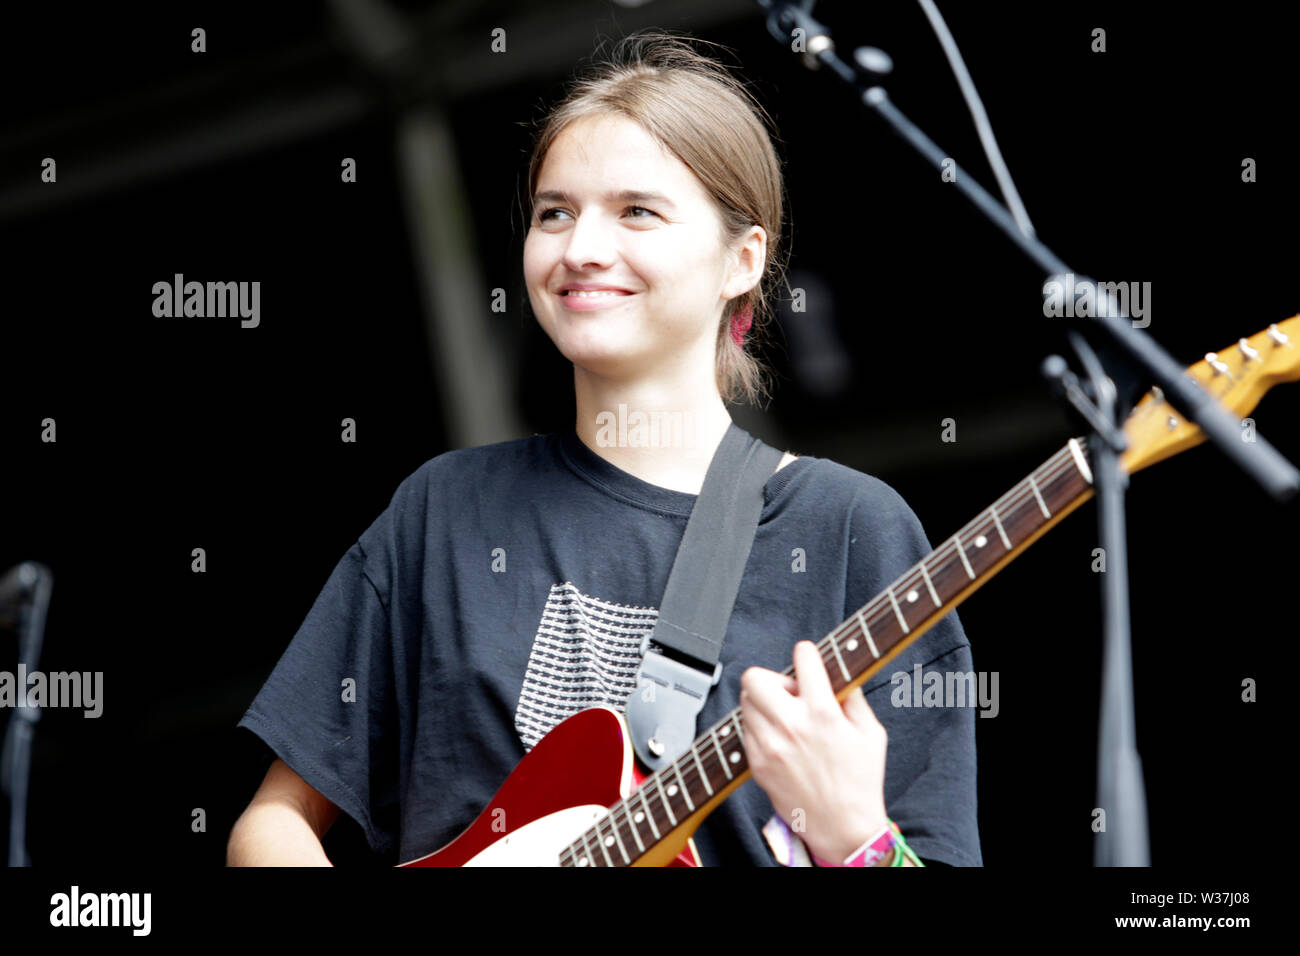 Clottie Cream of Goat Girl performs on stage as Barclaycard present British Summer Time Hyde Park on Saturday 13th July 2019 in London, England. Stock Photo